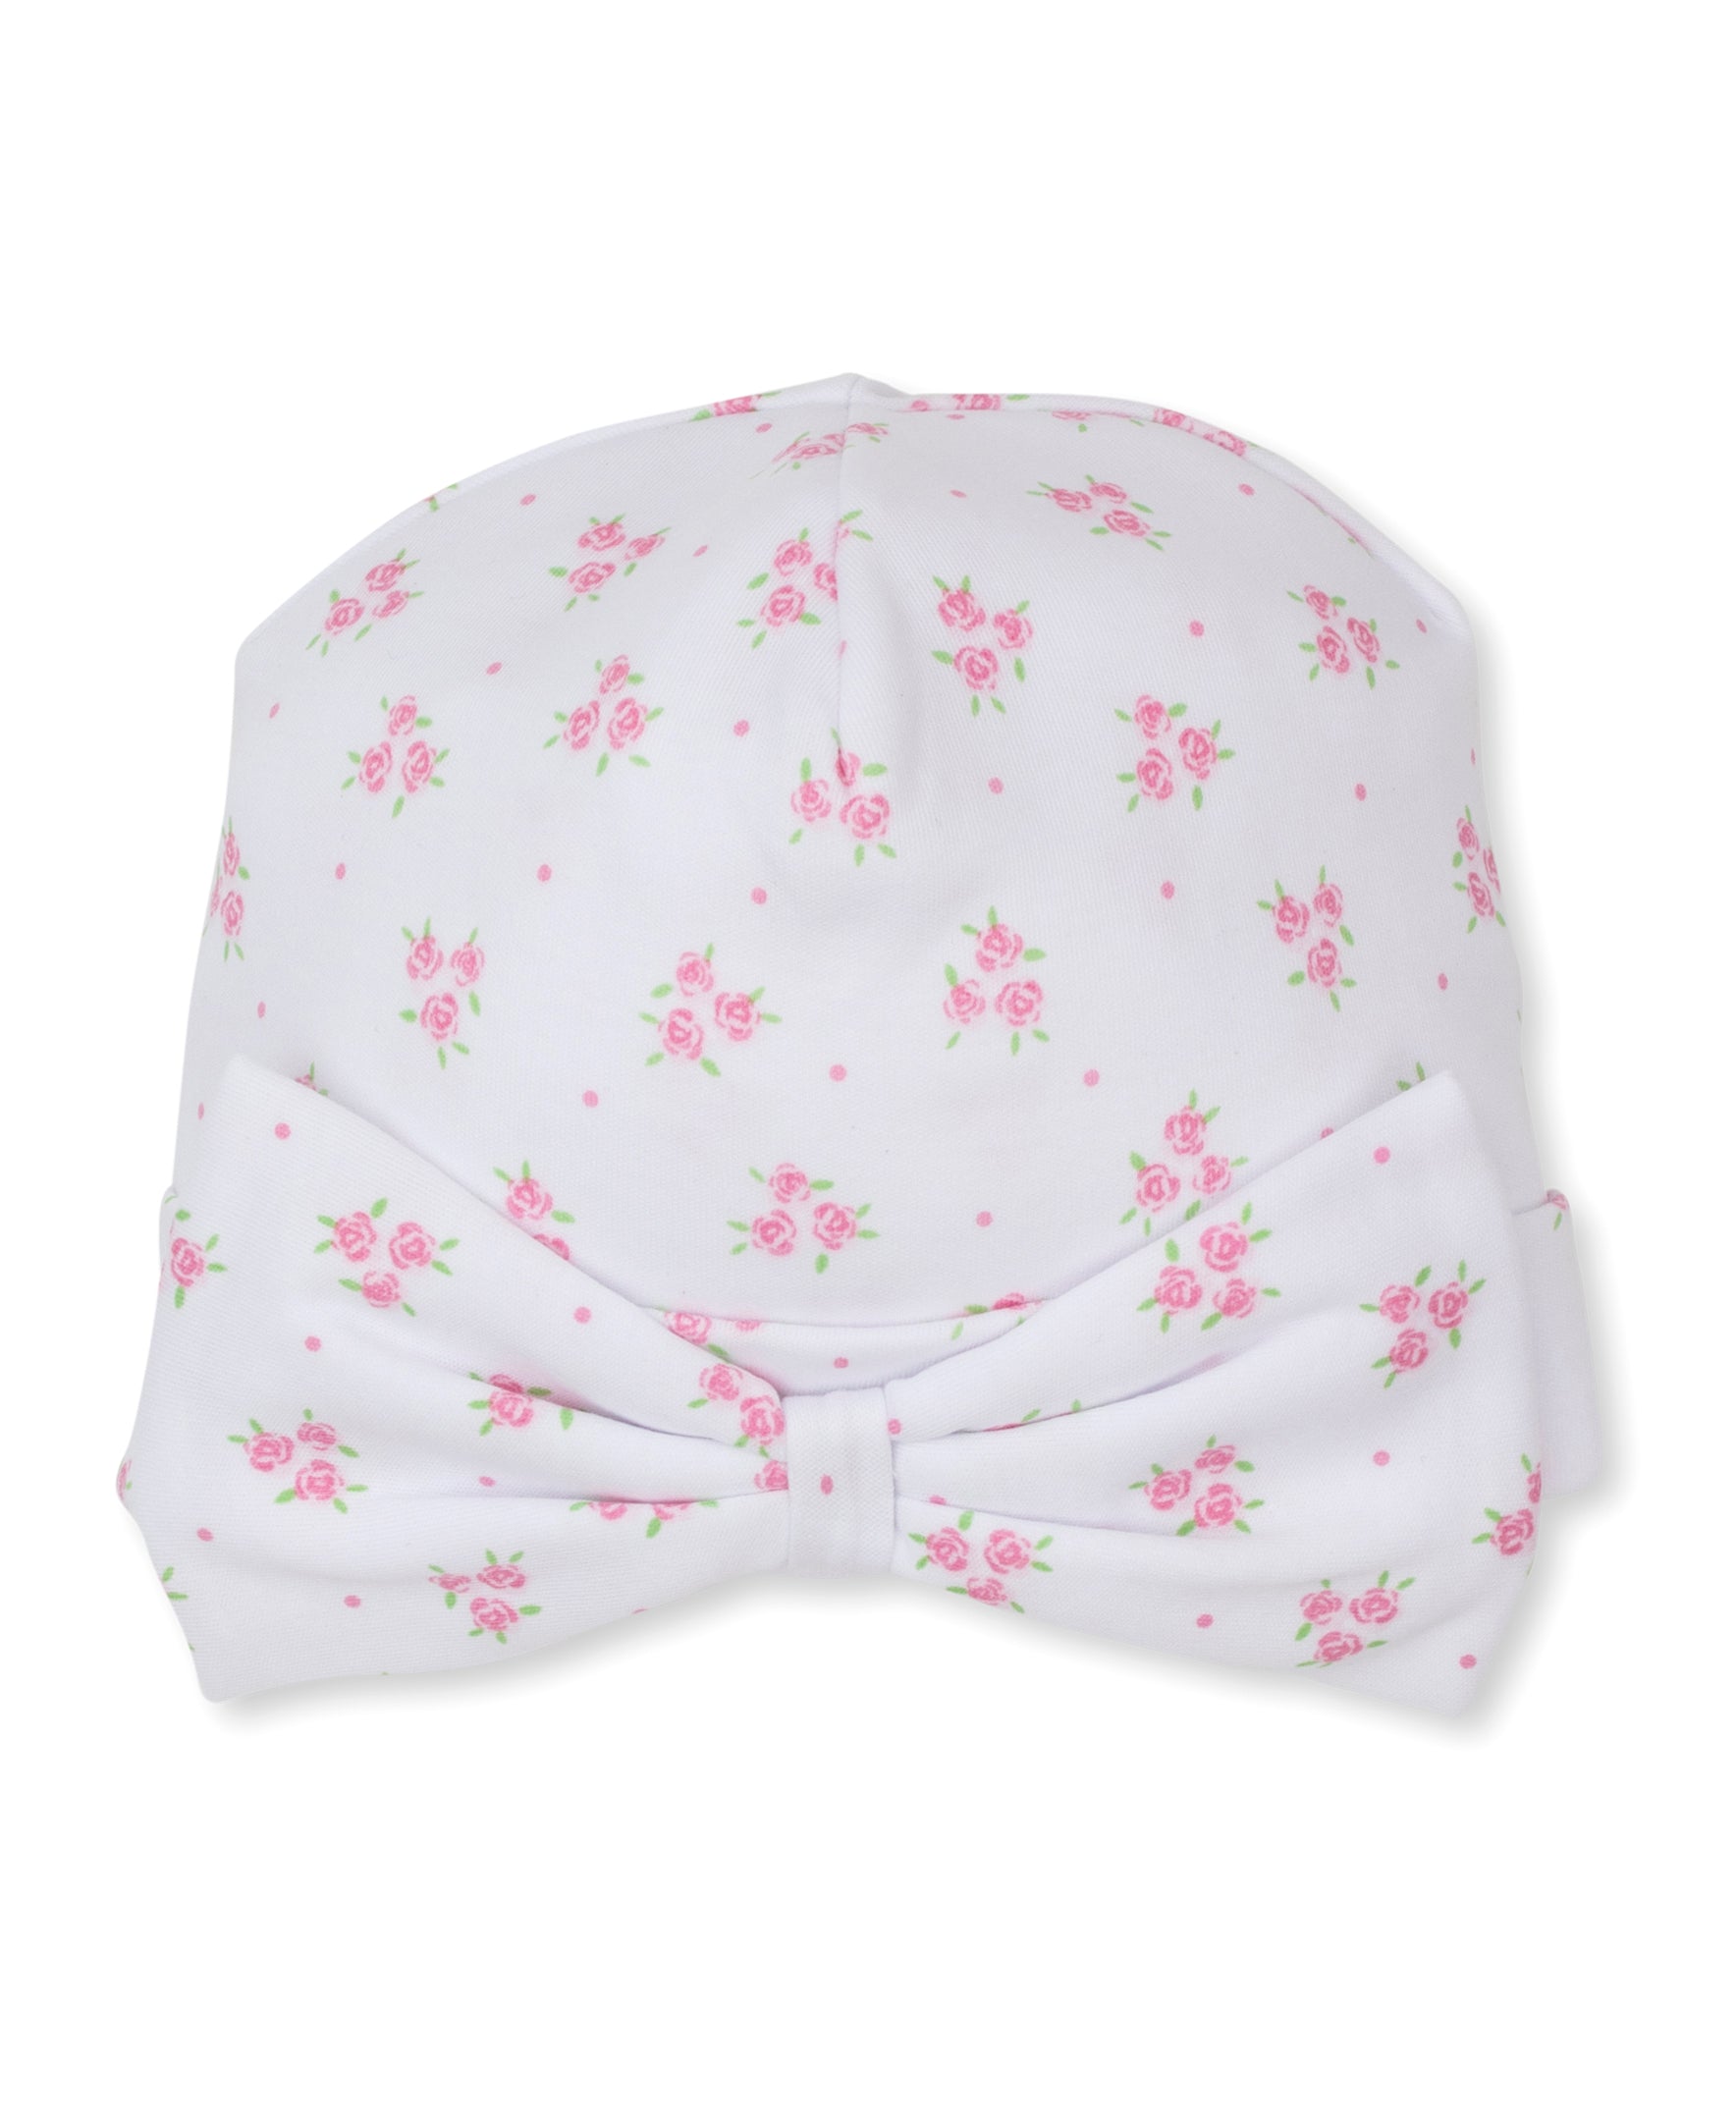 Rosy Tea Time Pima Cotton Baby Bow Hat